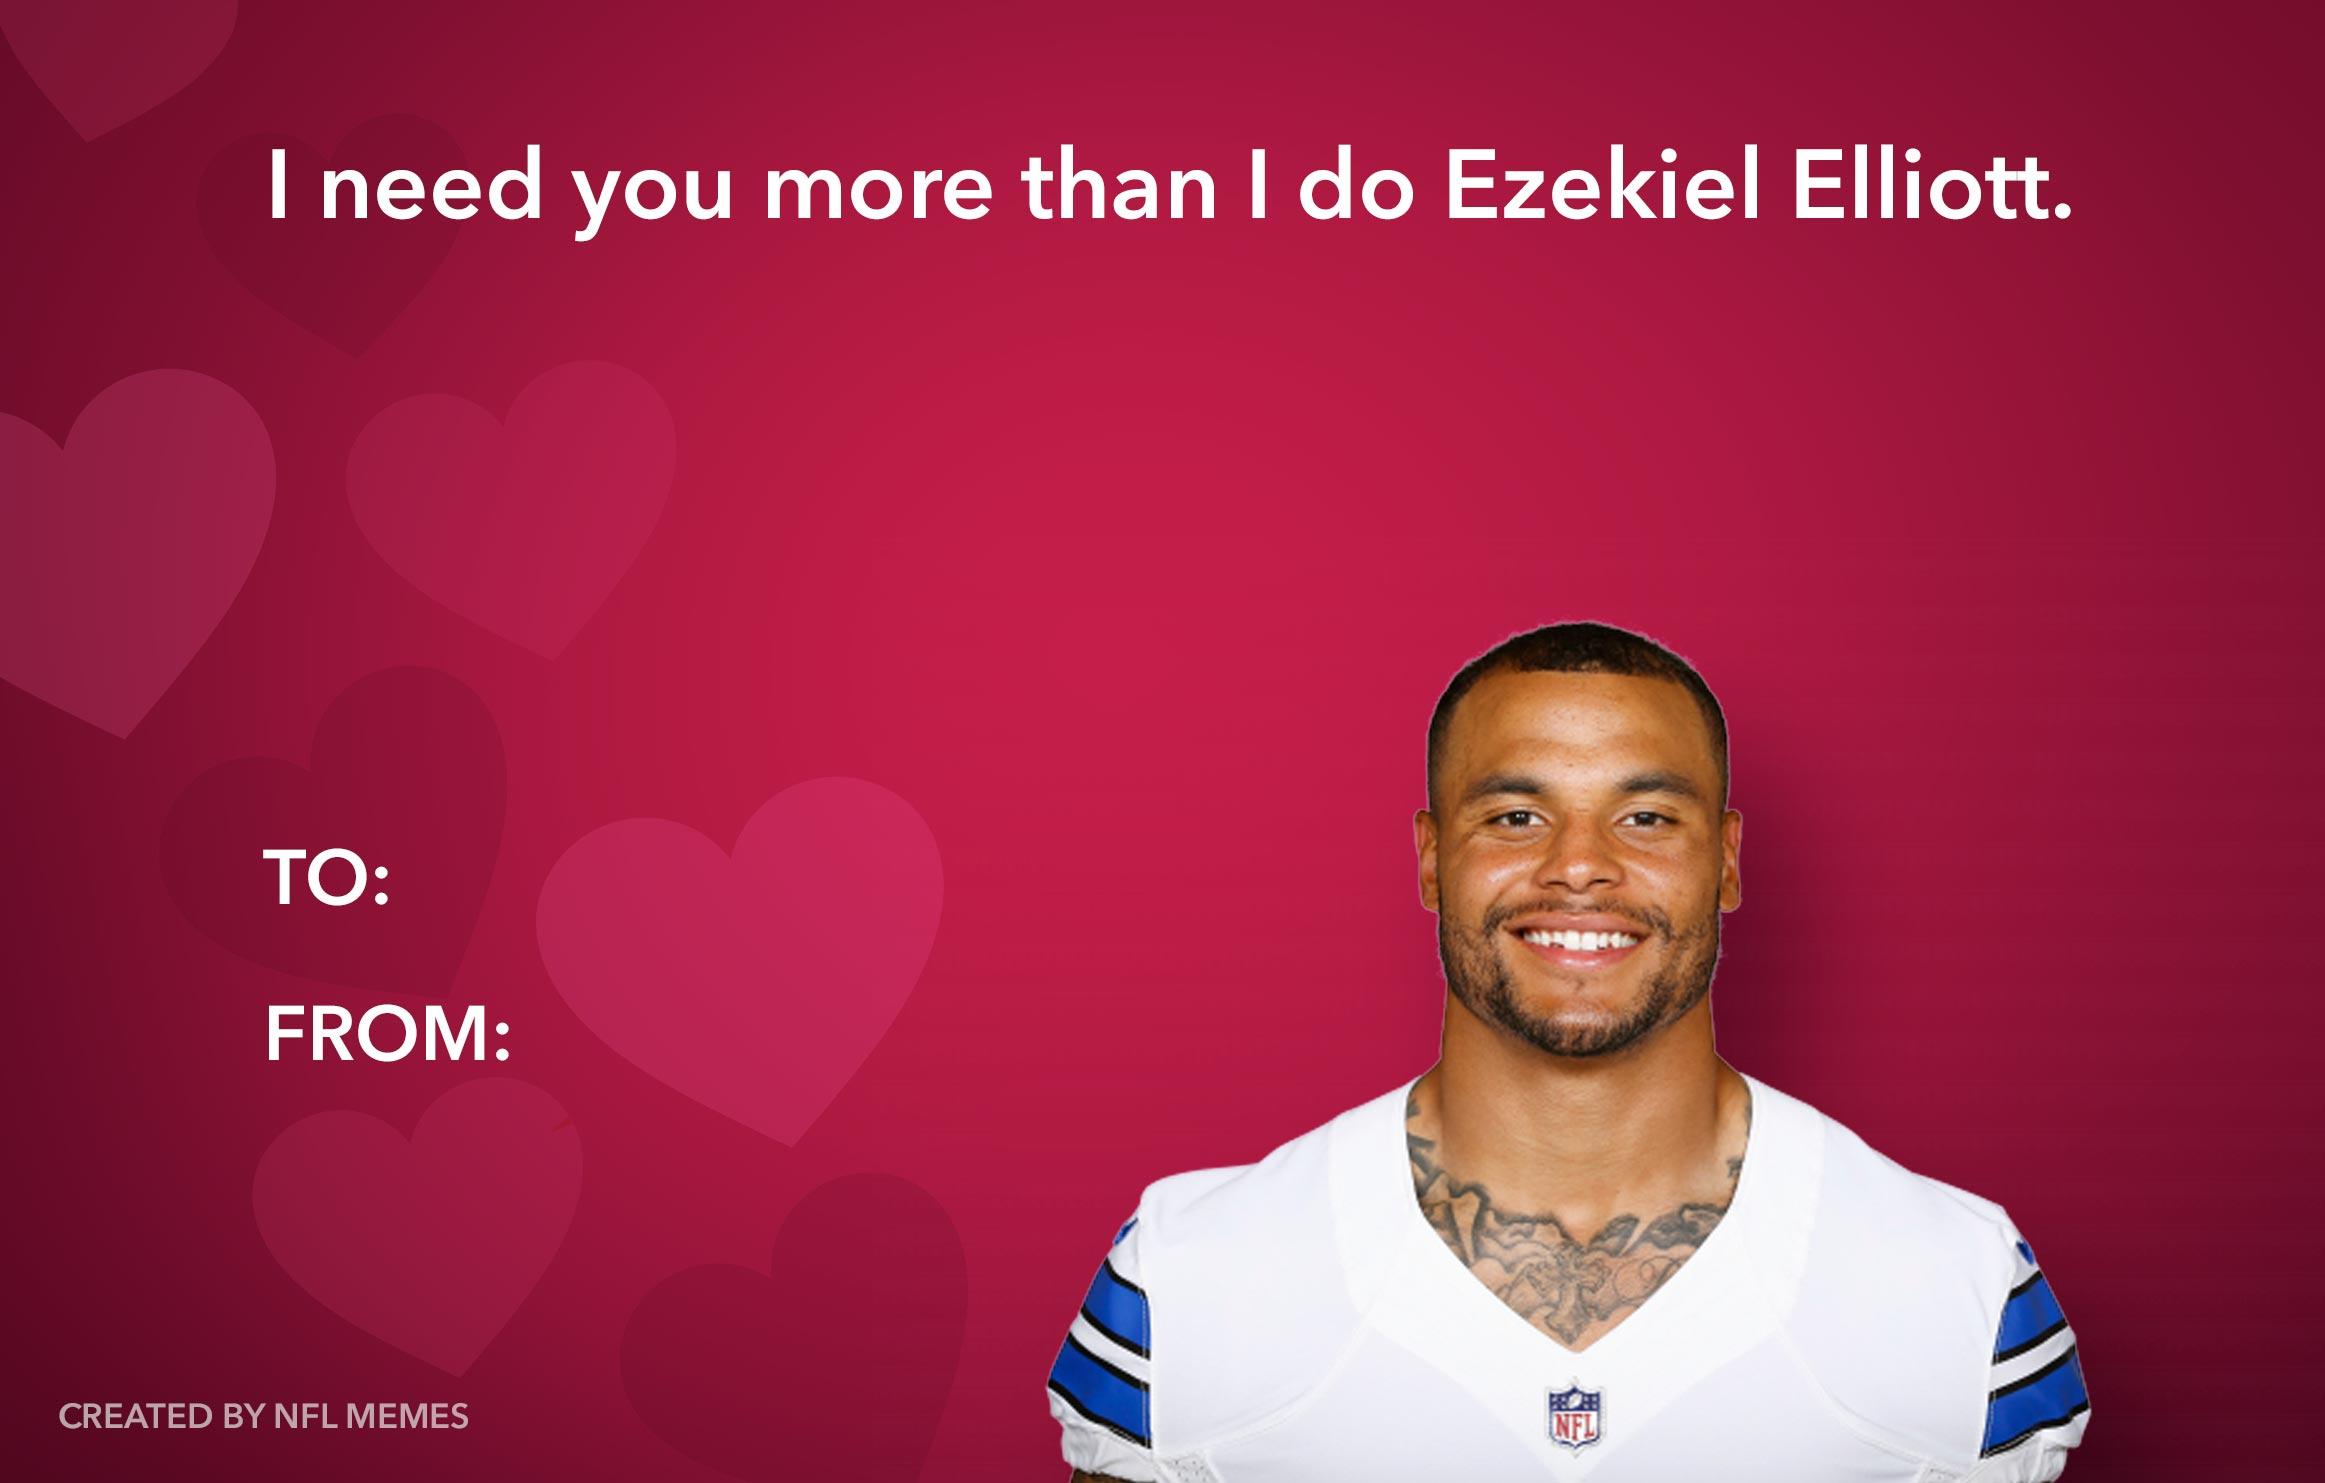 Here’s This Year’s Batch Of Hilarious NFL-Themed Valentine’s Day Cards (PICS)